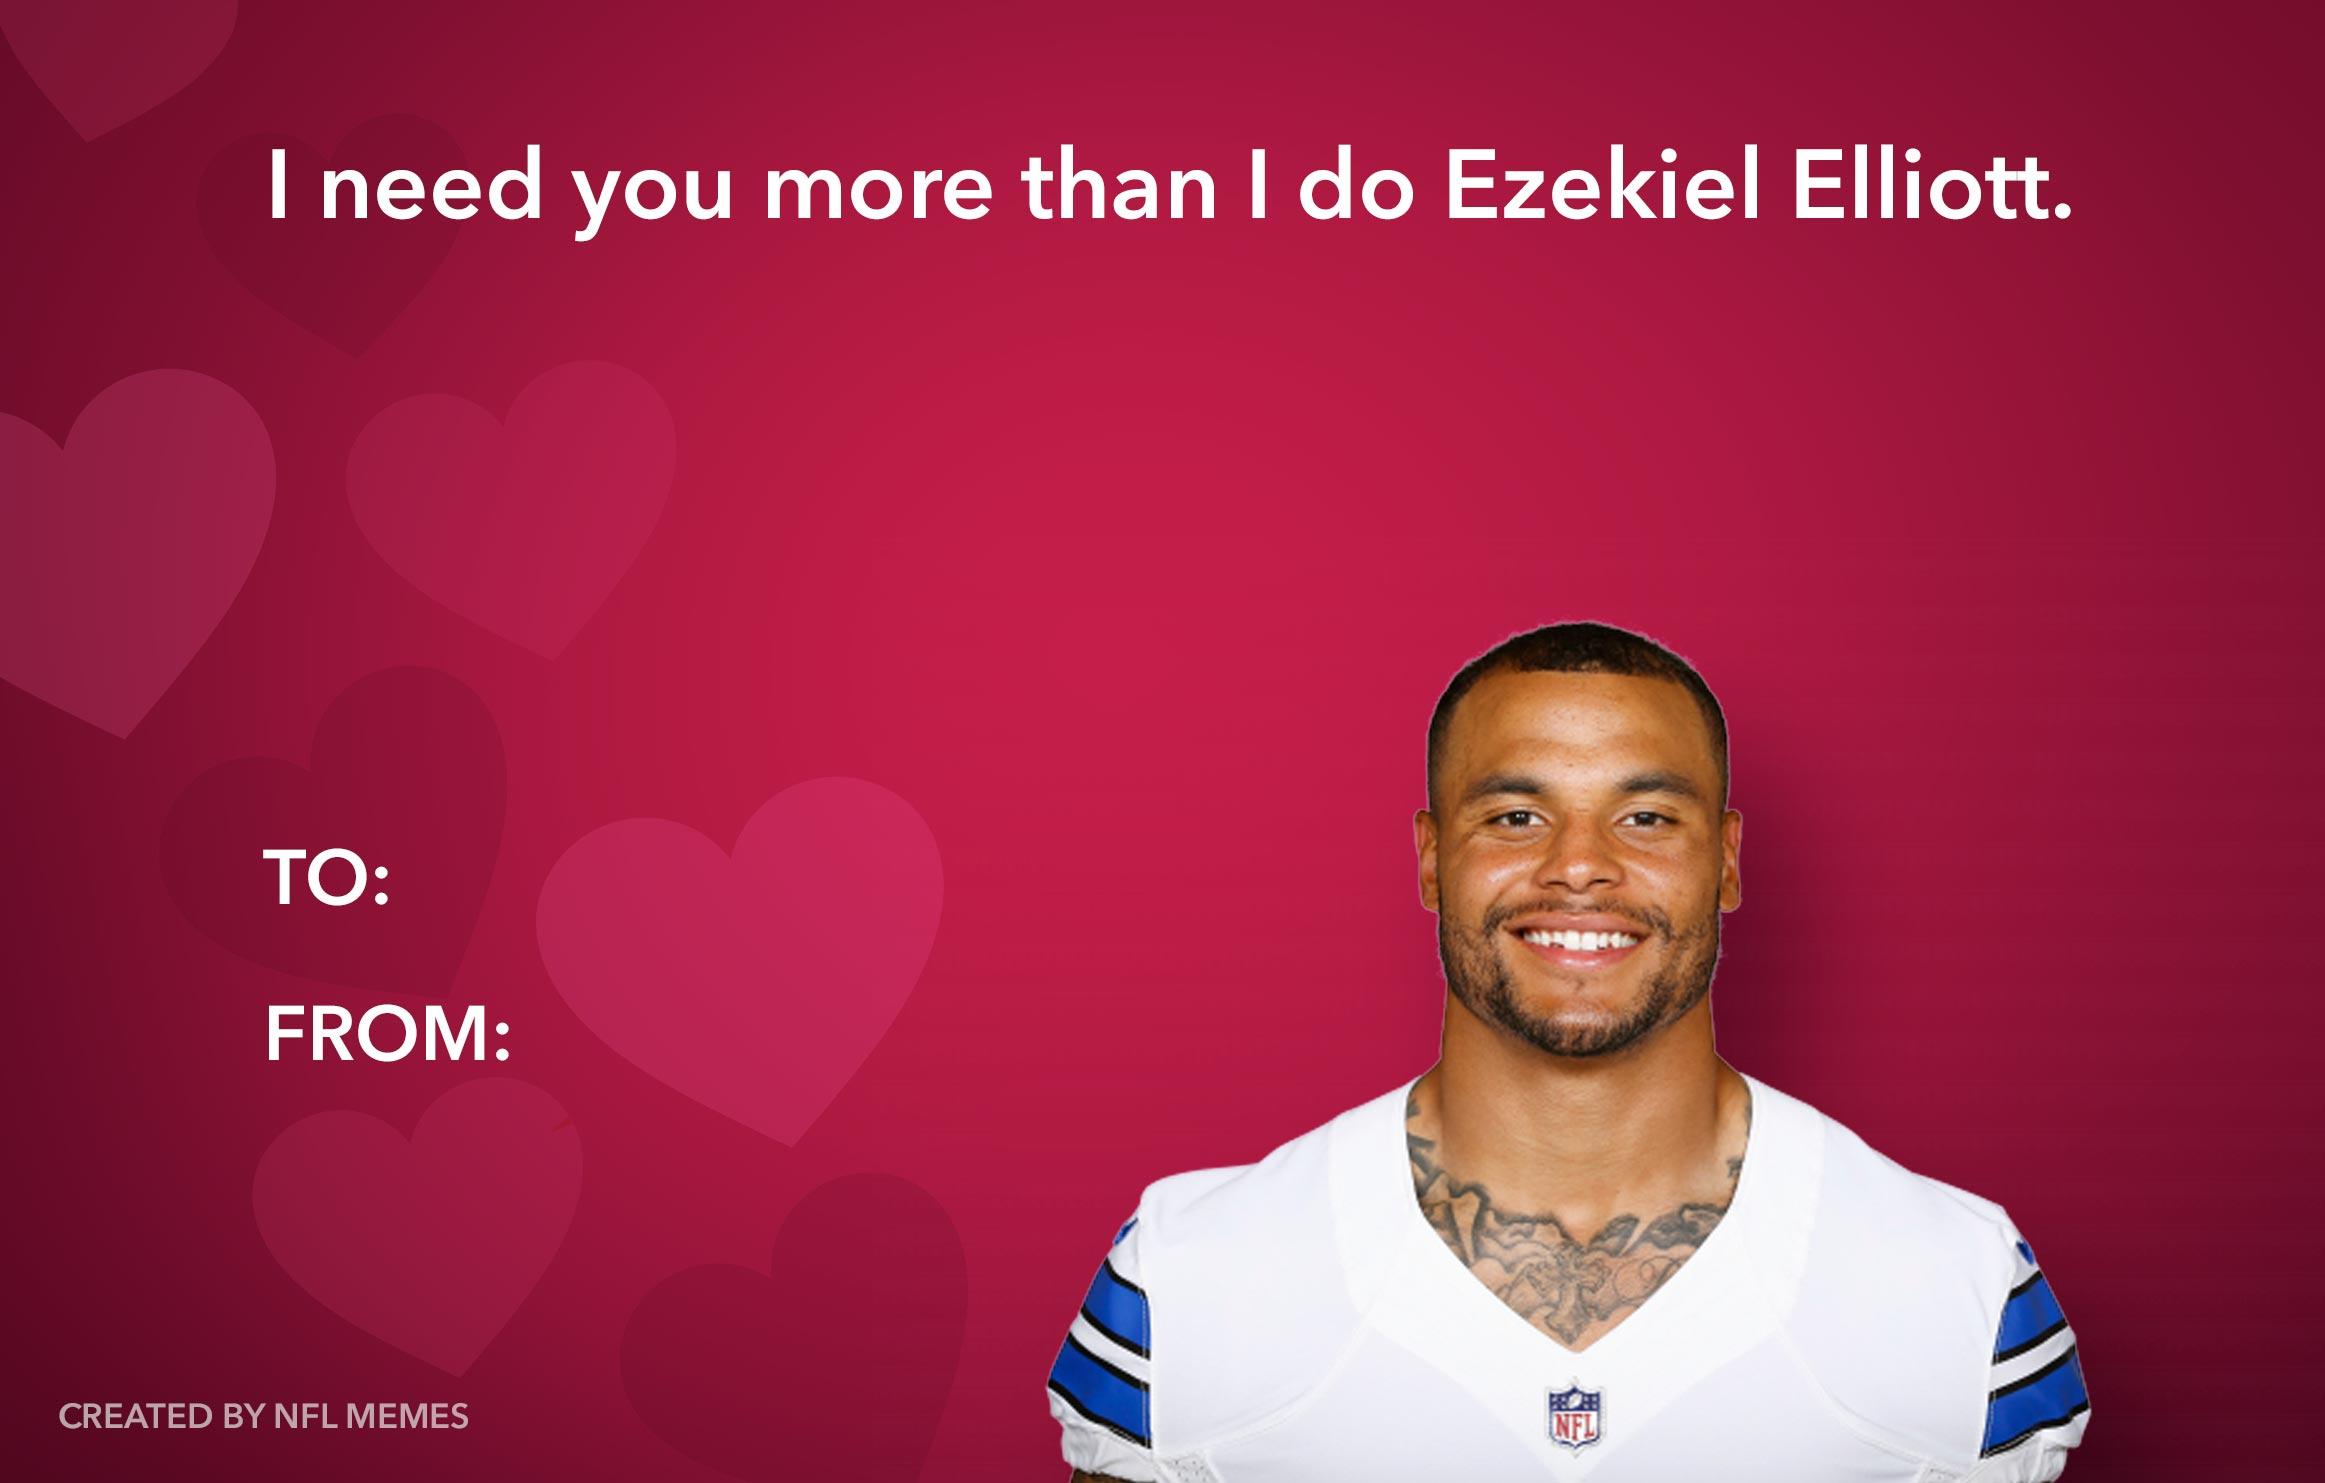 Here’s This Year’s Batch Of Hilarious NFL-Themed Valentine’s Day Cards (PICS)